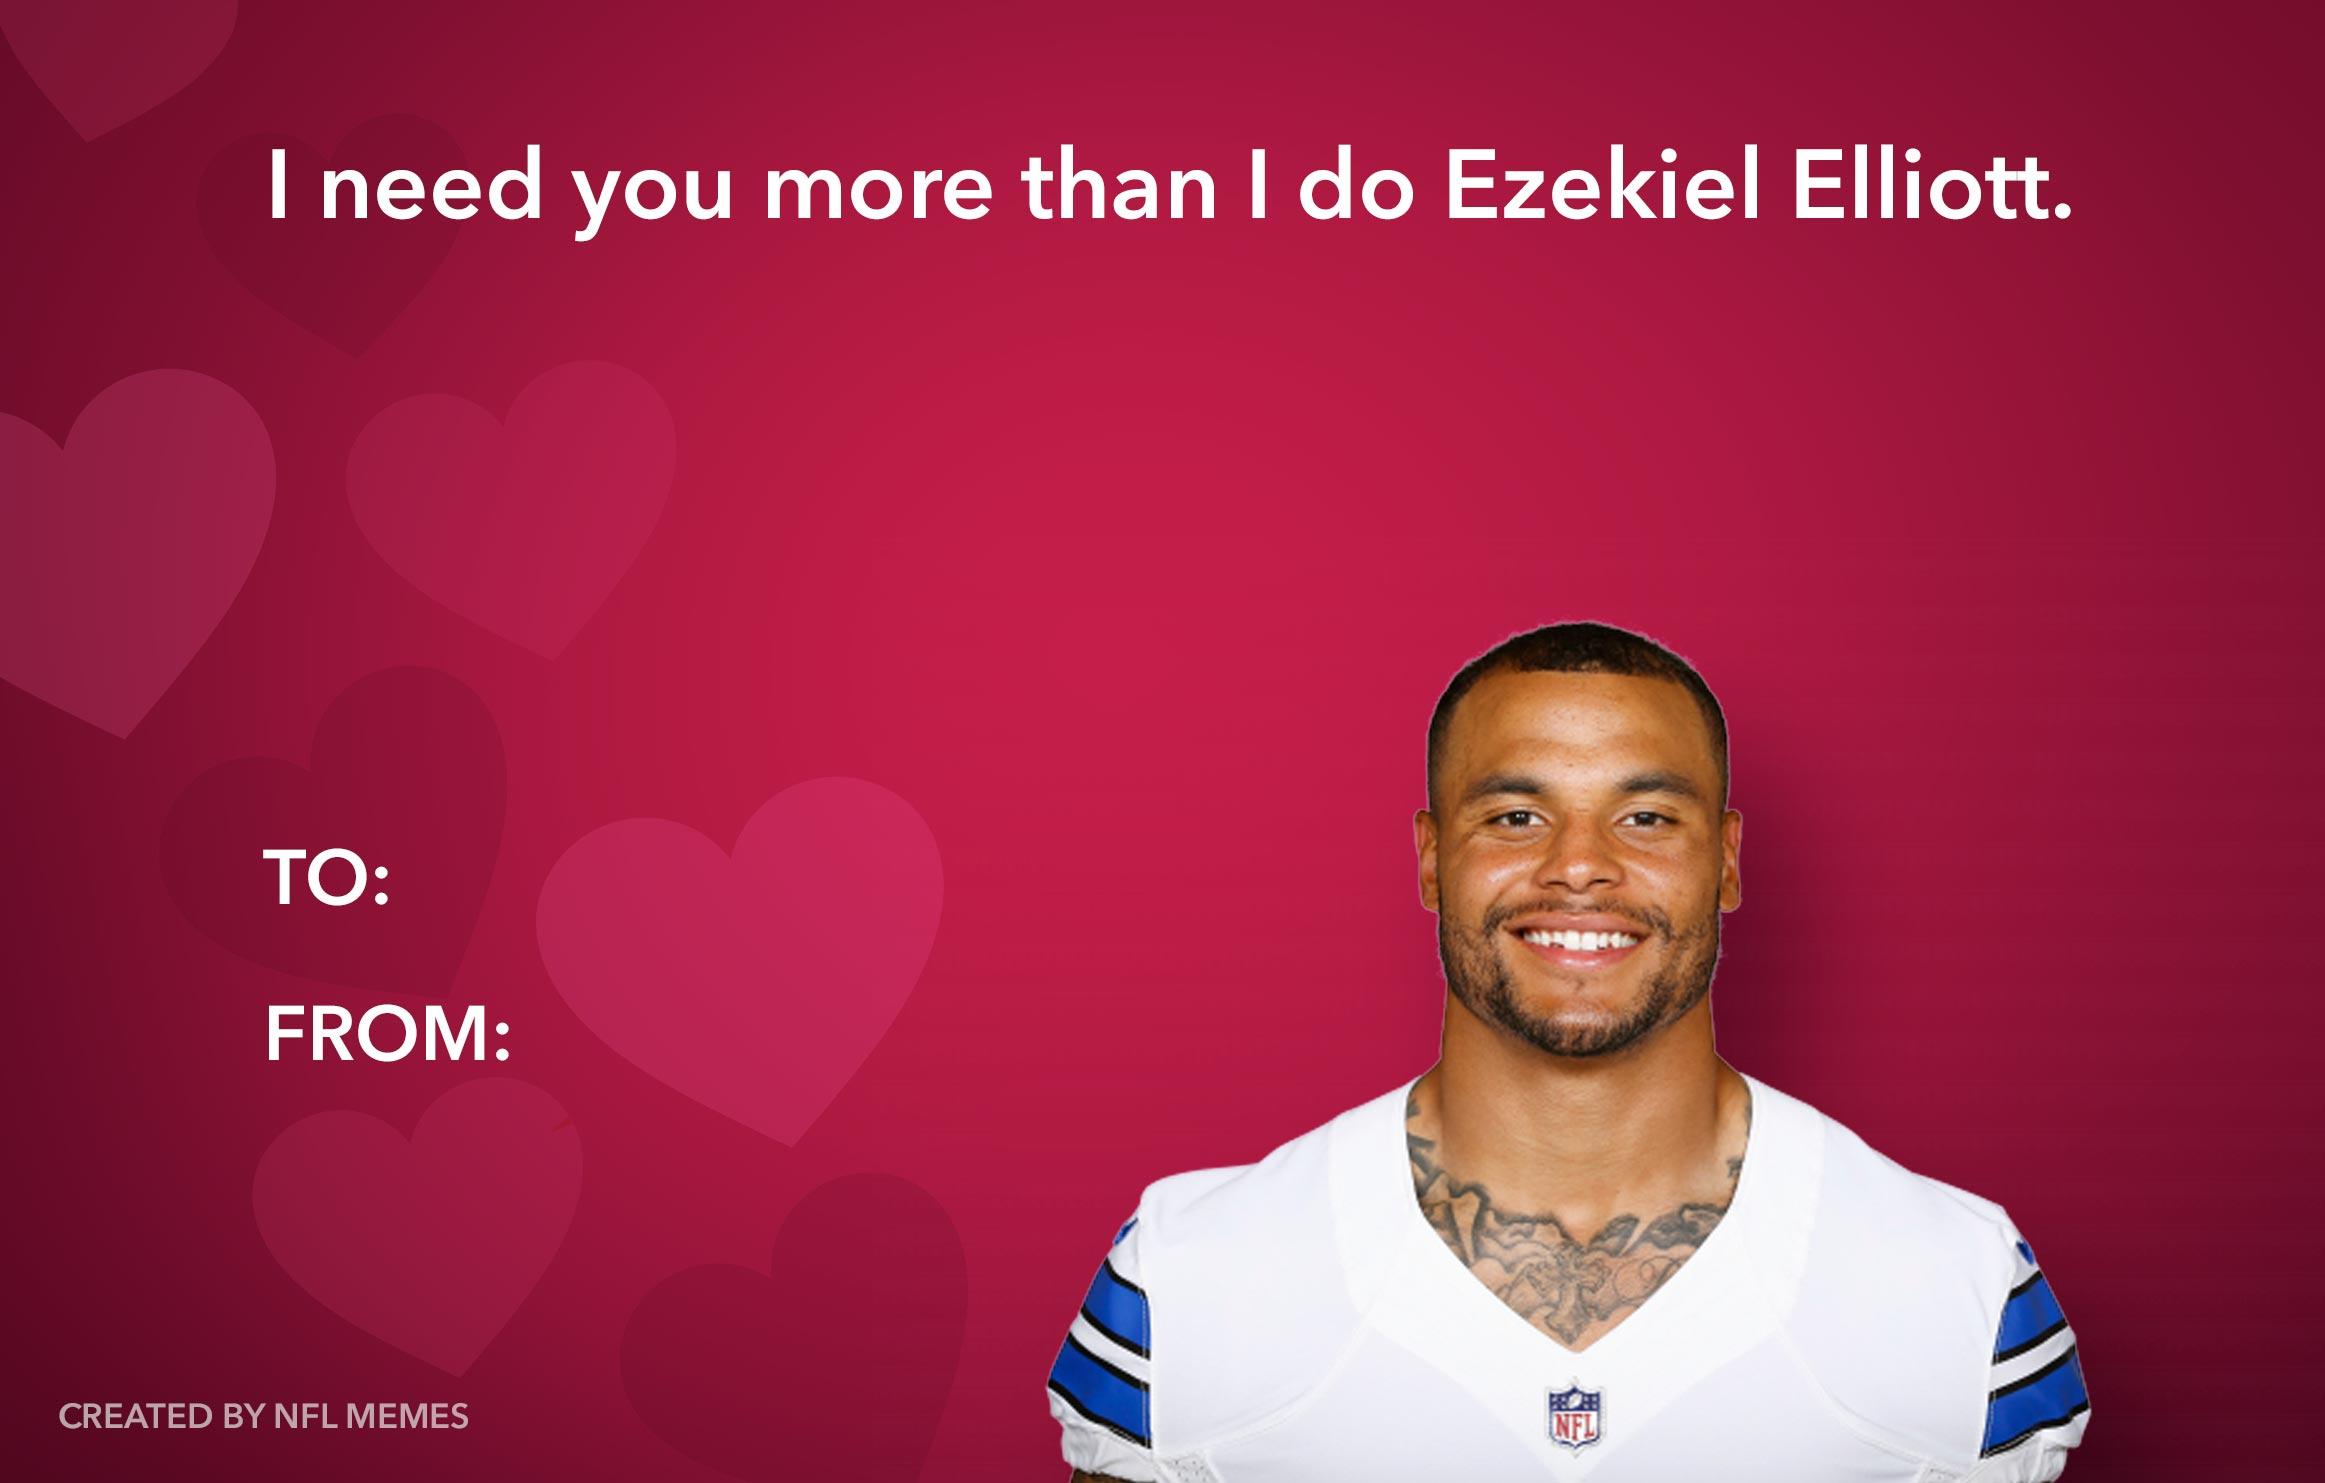 Here’s This Year’s Batch Of Hilarious NFL-Themed Valentine’s Day Cards (PICS)